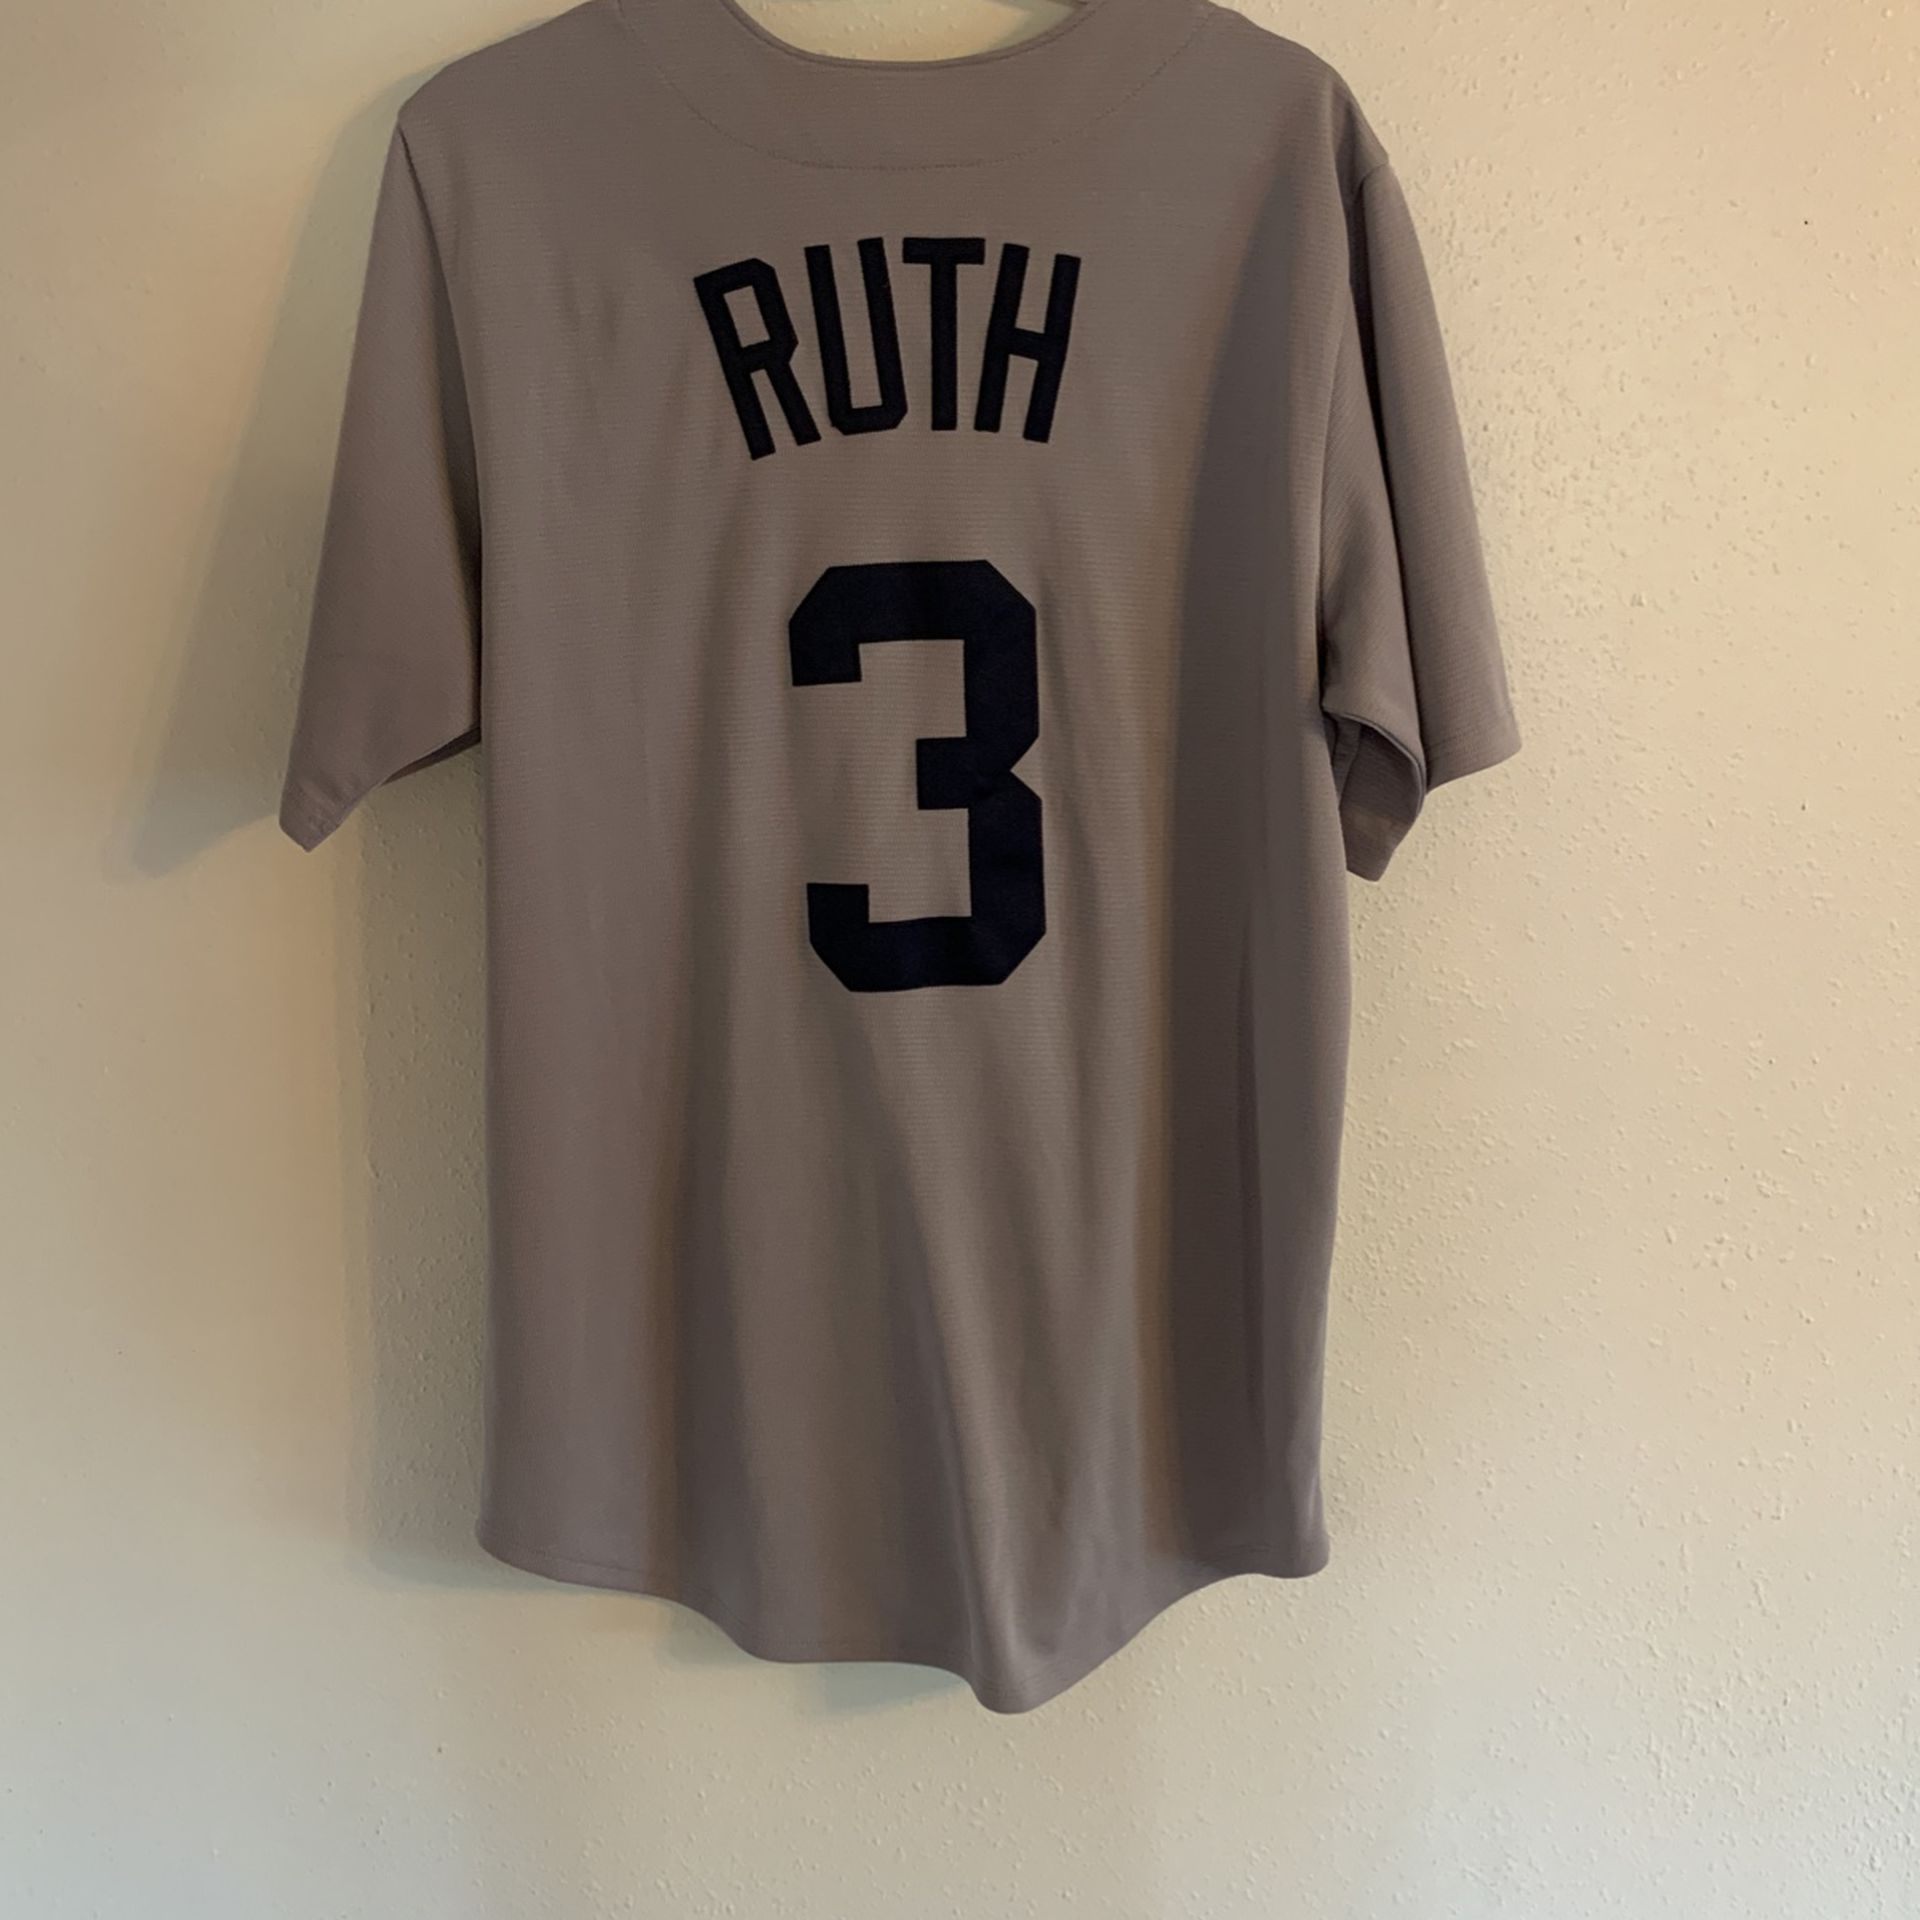 New York Yankees Babe Ruth Jersey for Sale in Tacoma, WA